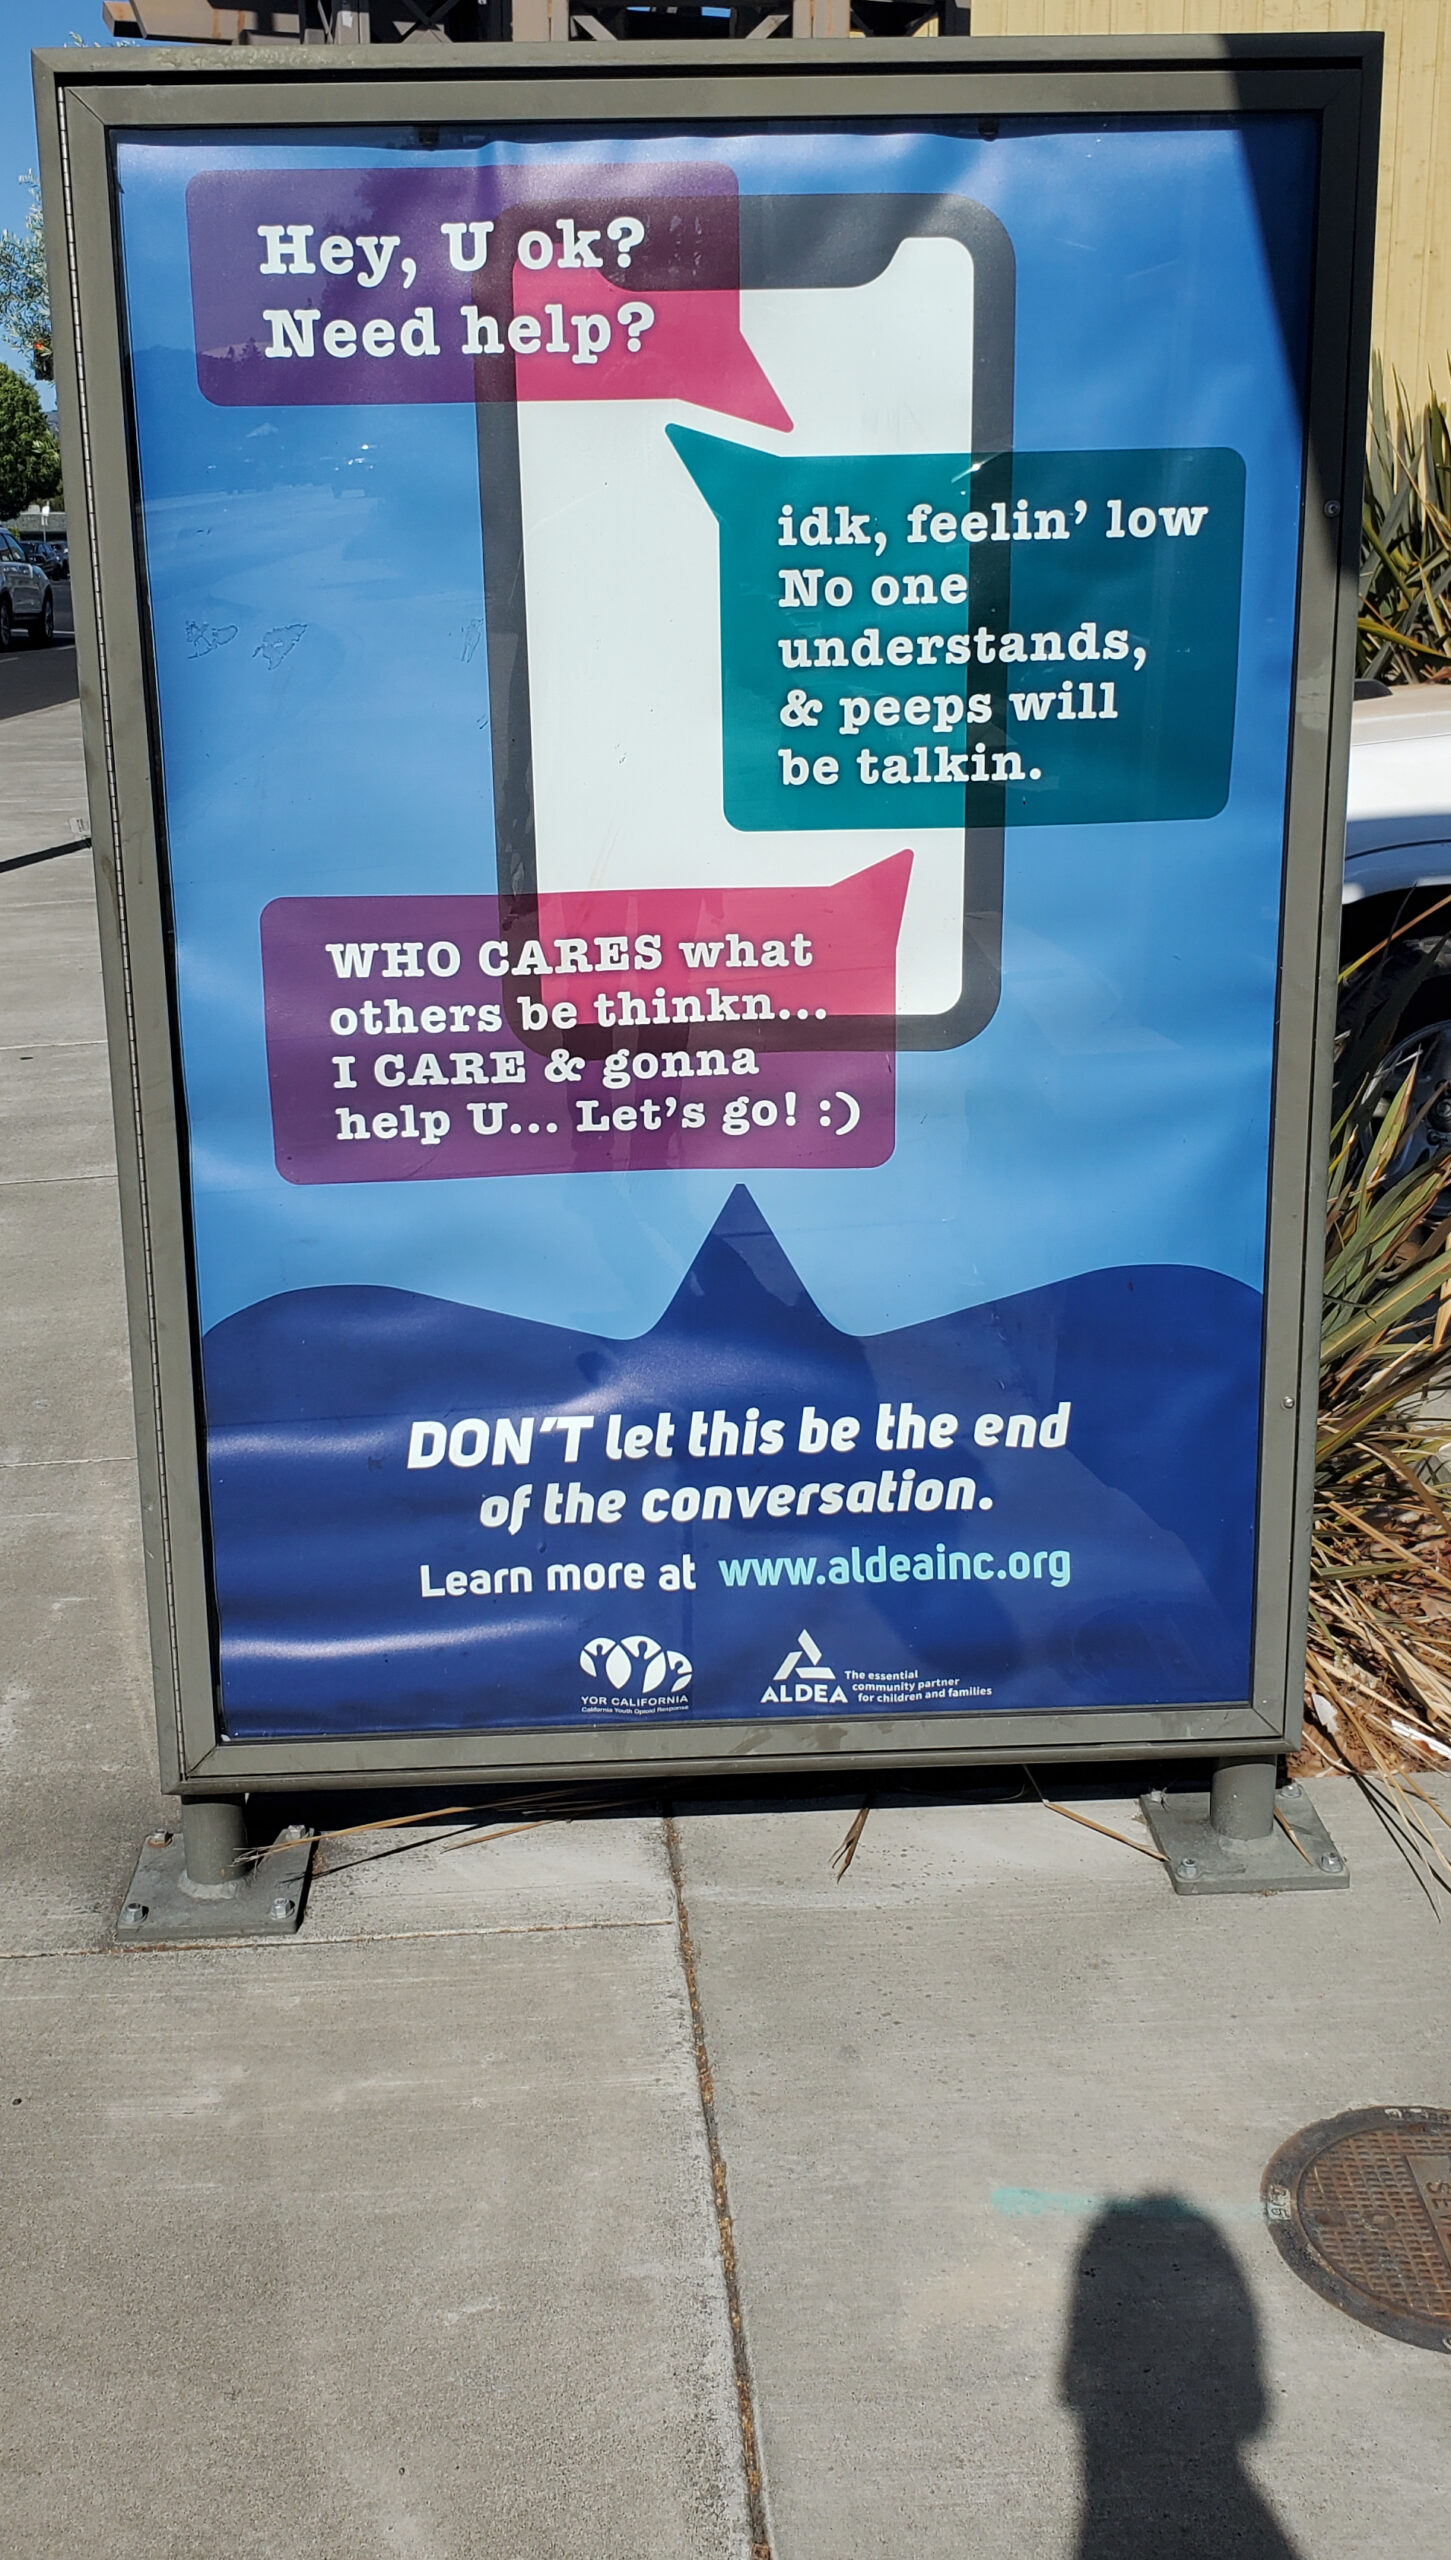 A large ad on the sidewalk with terrible ad copywriting.